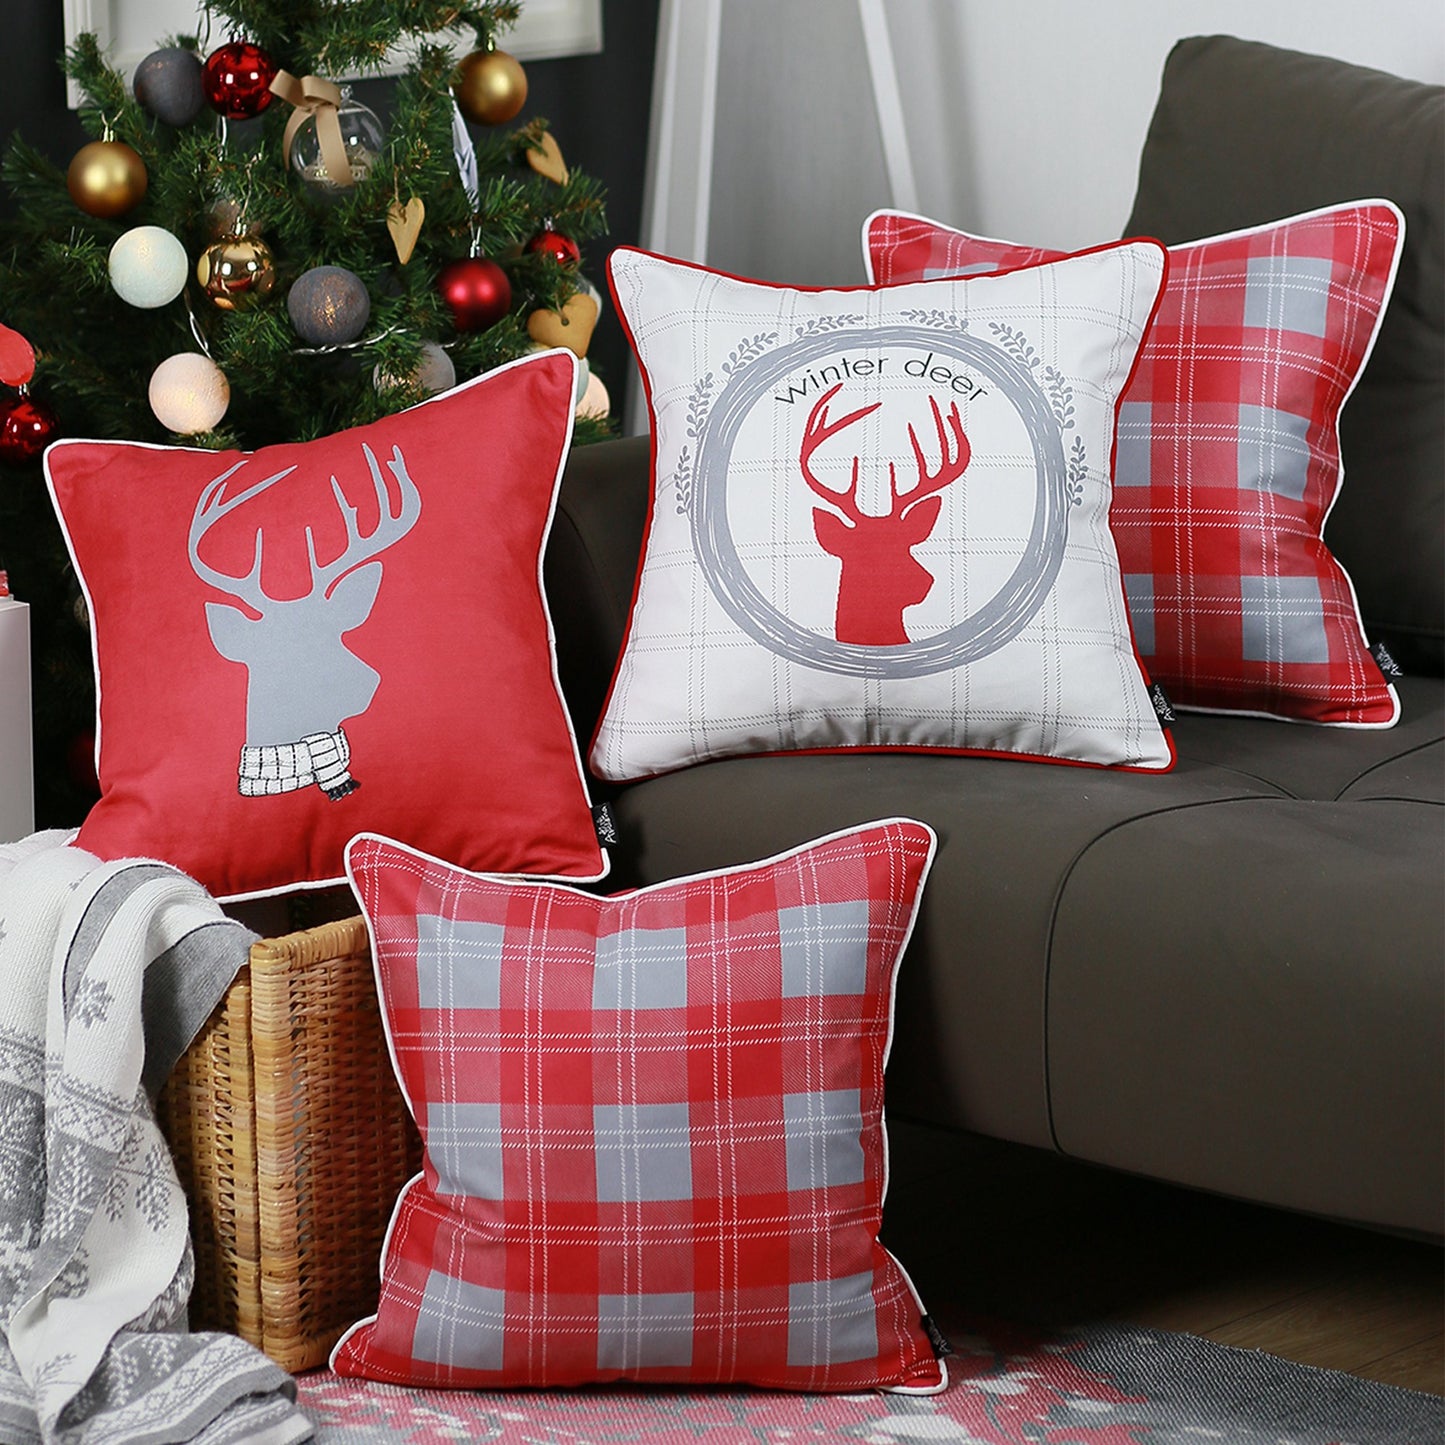 Set of 4 18" Winter Deer Throw Pillow Cover in Multicolor